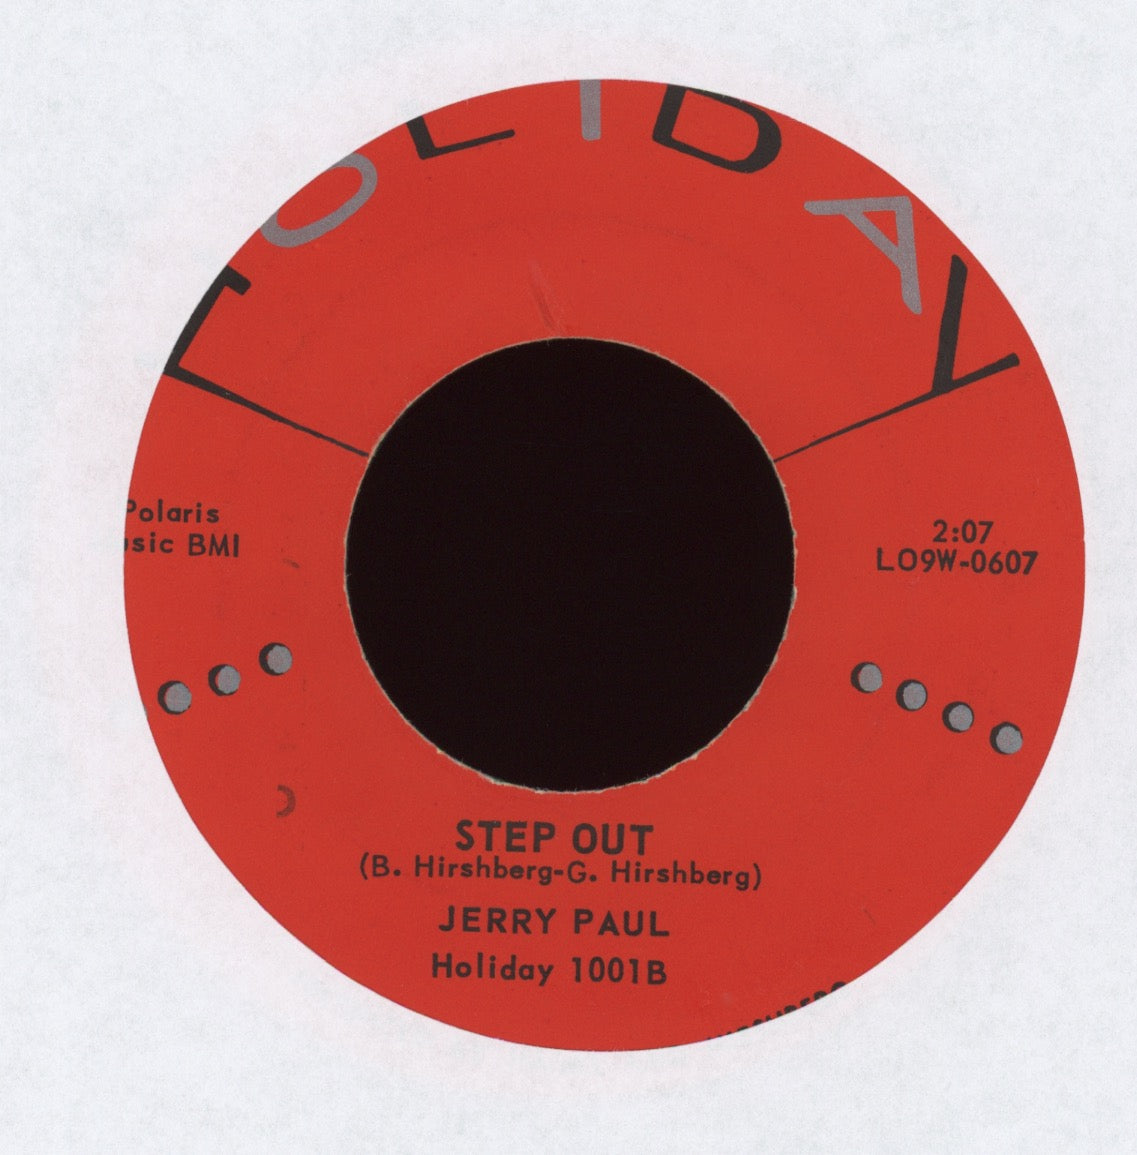 Jerry Paul - Oh Boy/ Step Out on Holiday